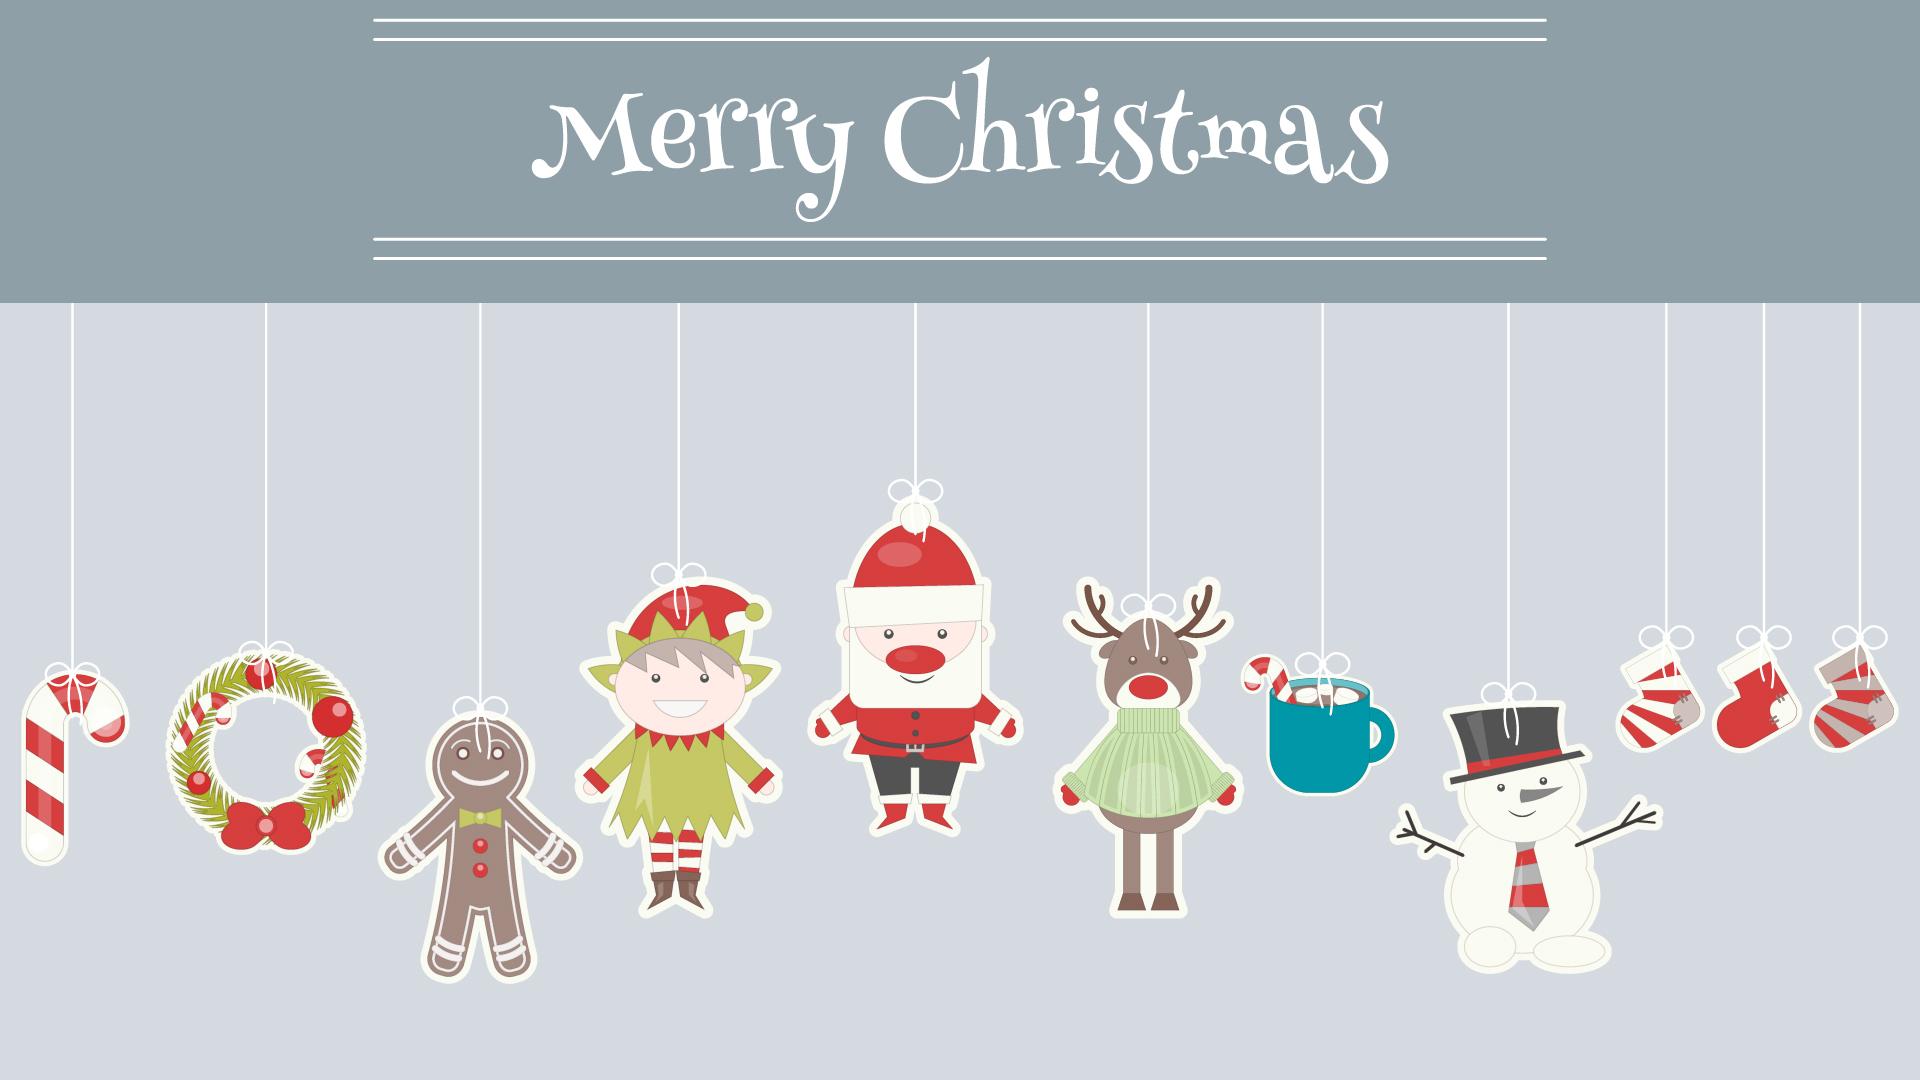 Free Cute Christmas Wallpaper for Laptops and Devices